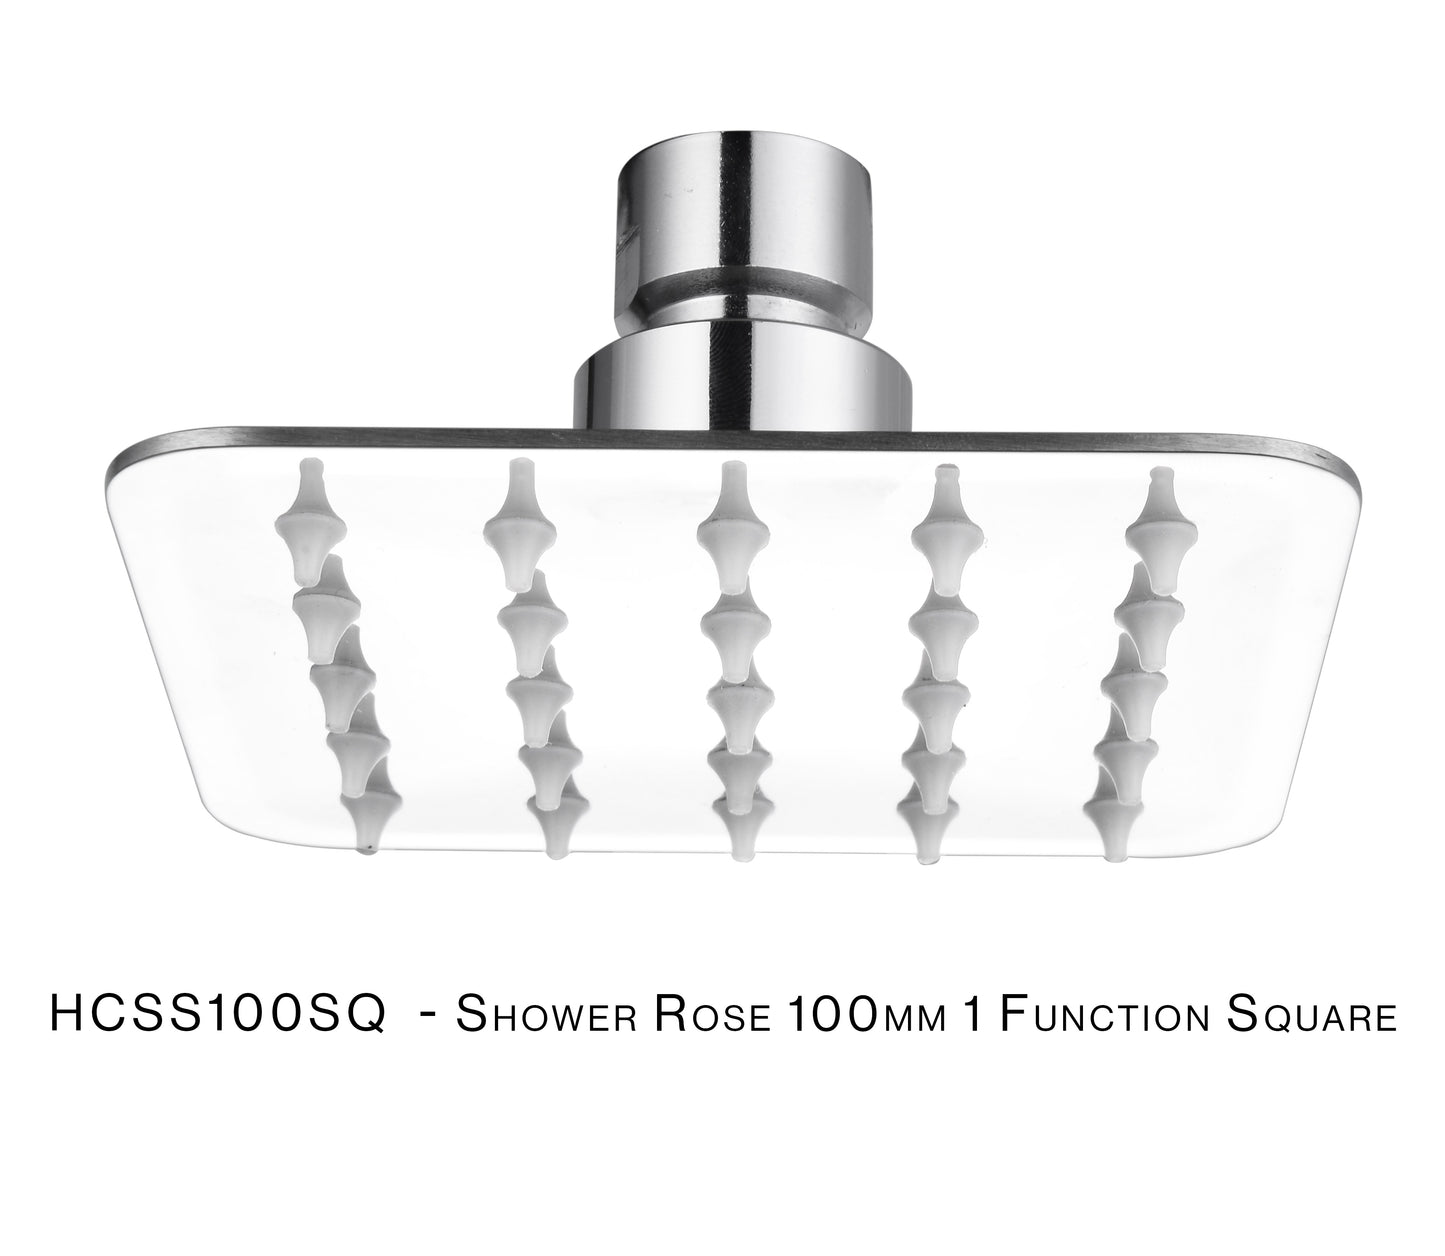 H&C SHOWER ROSE SQUARE SLIM STAINLESS STEEL 100MM 1 FUNCTION HCSS100SQ